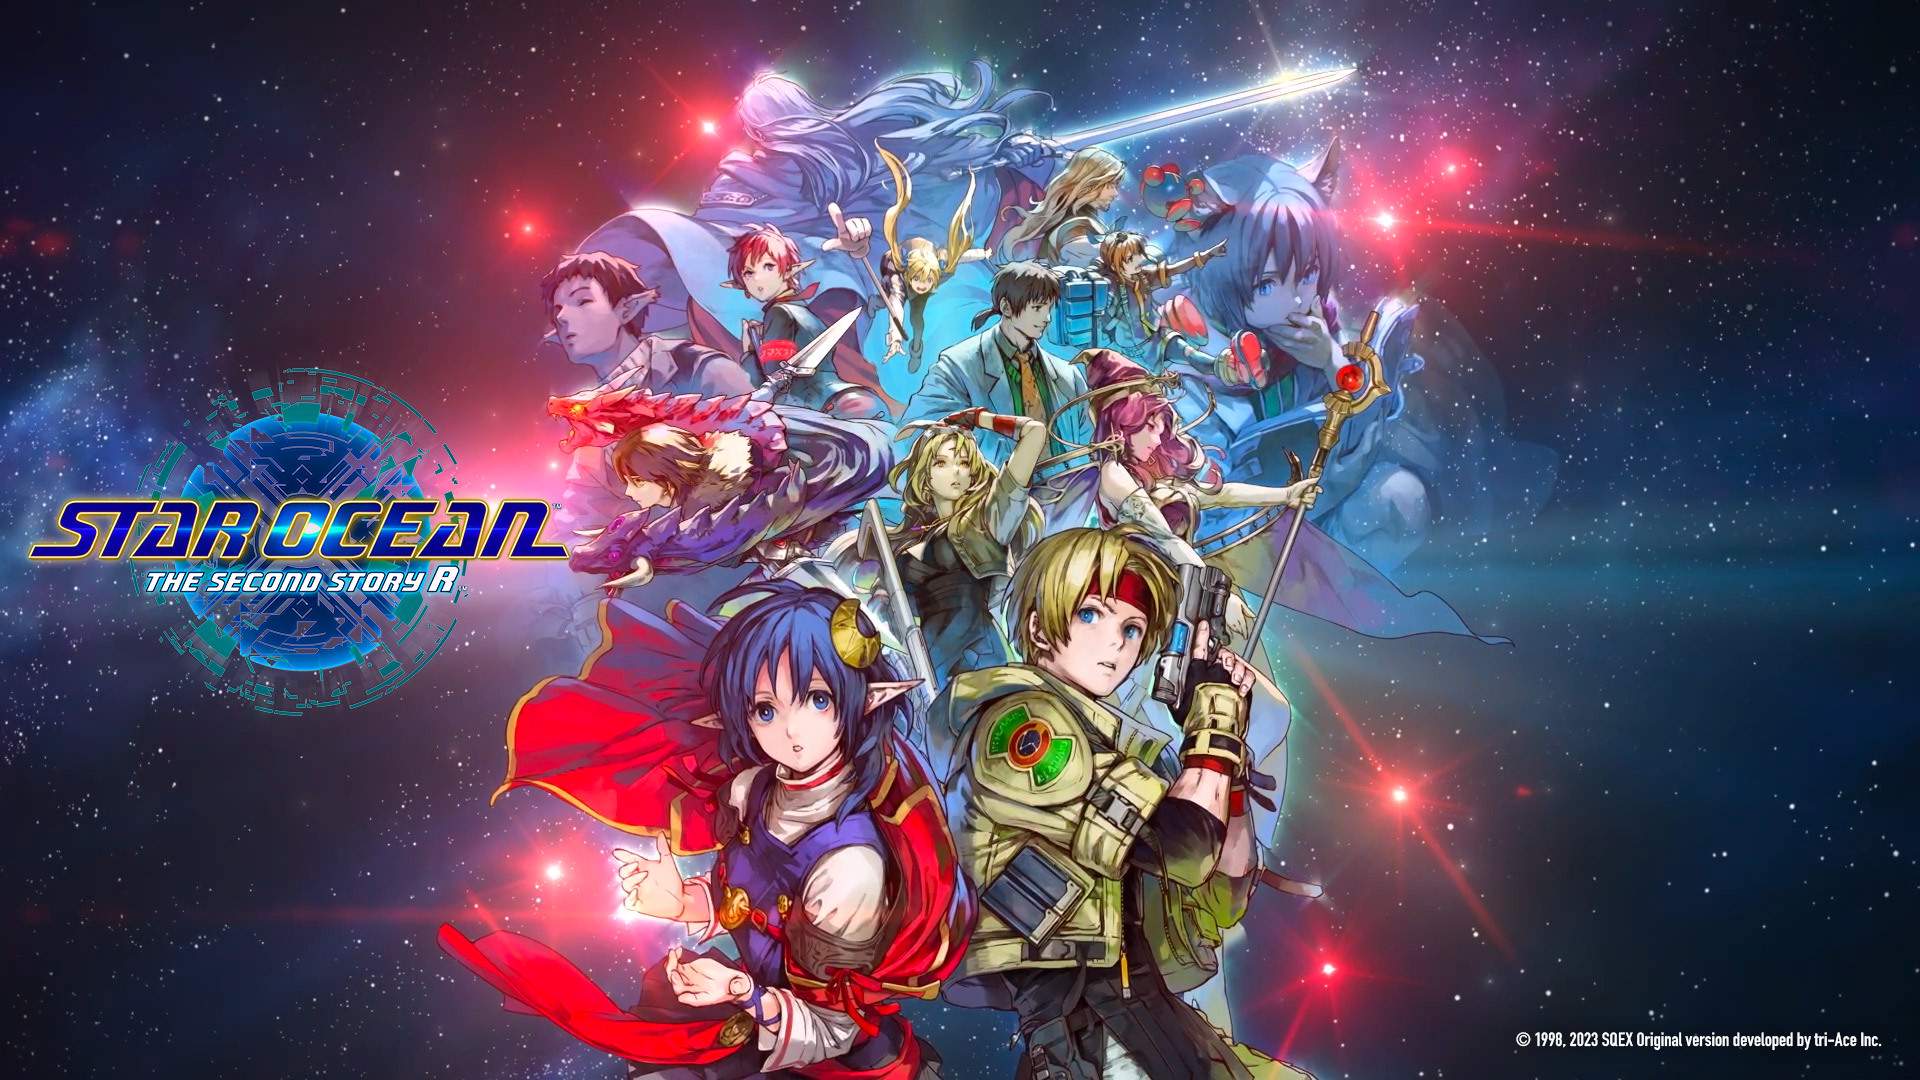 Star Ocean characters on space background